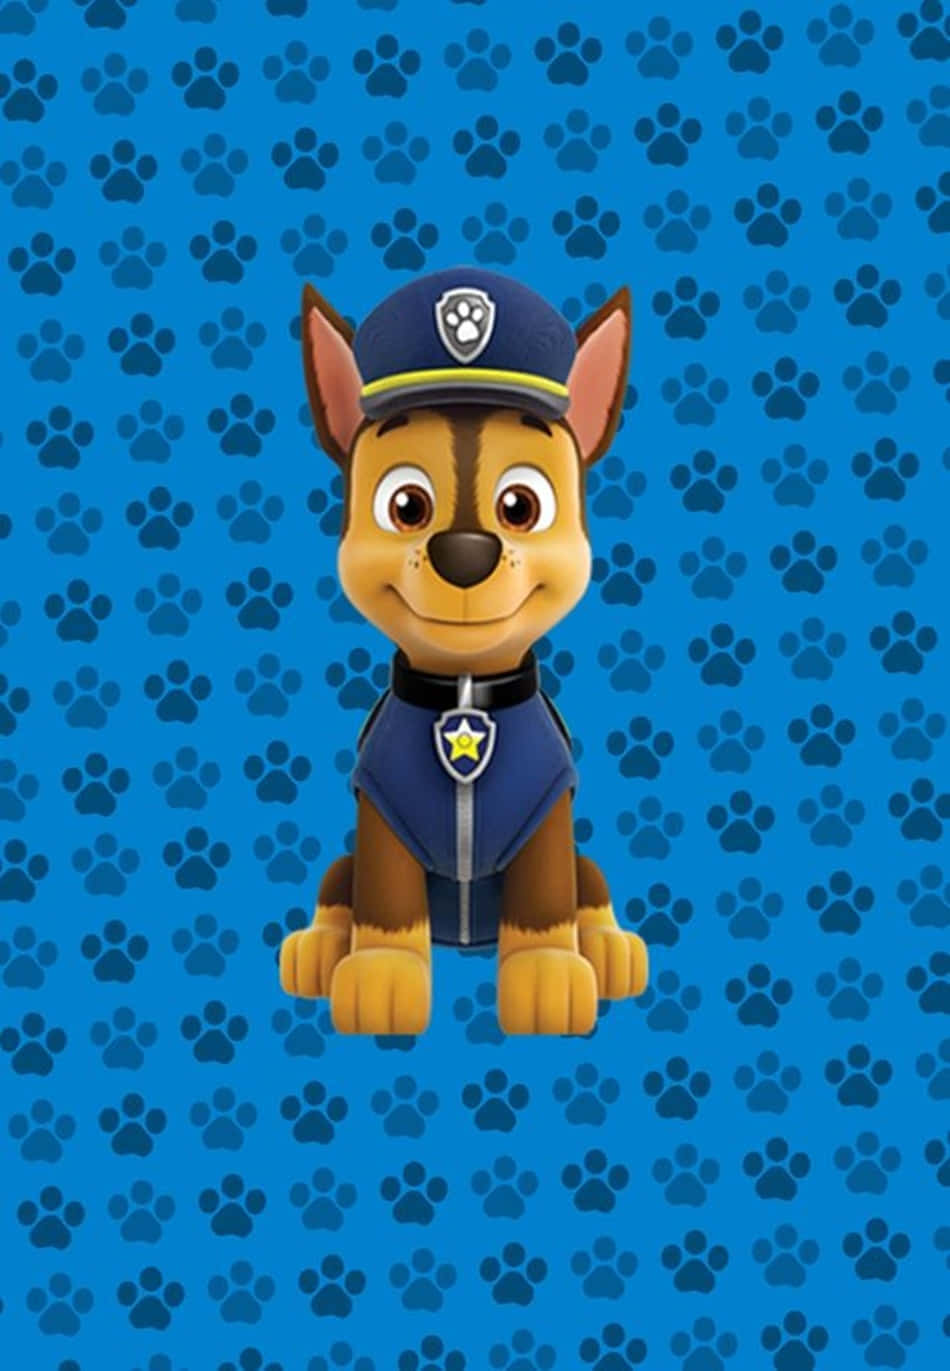 Join Chase the Police Pup and the Paw Patrol on their Exciting Adventures! Wallpaper